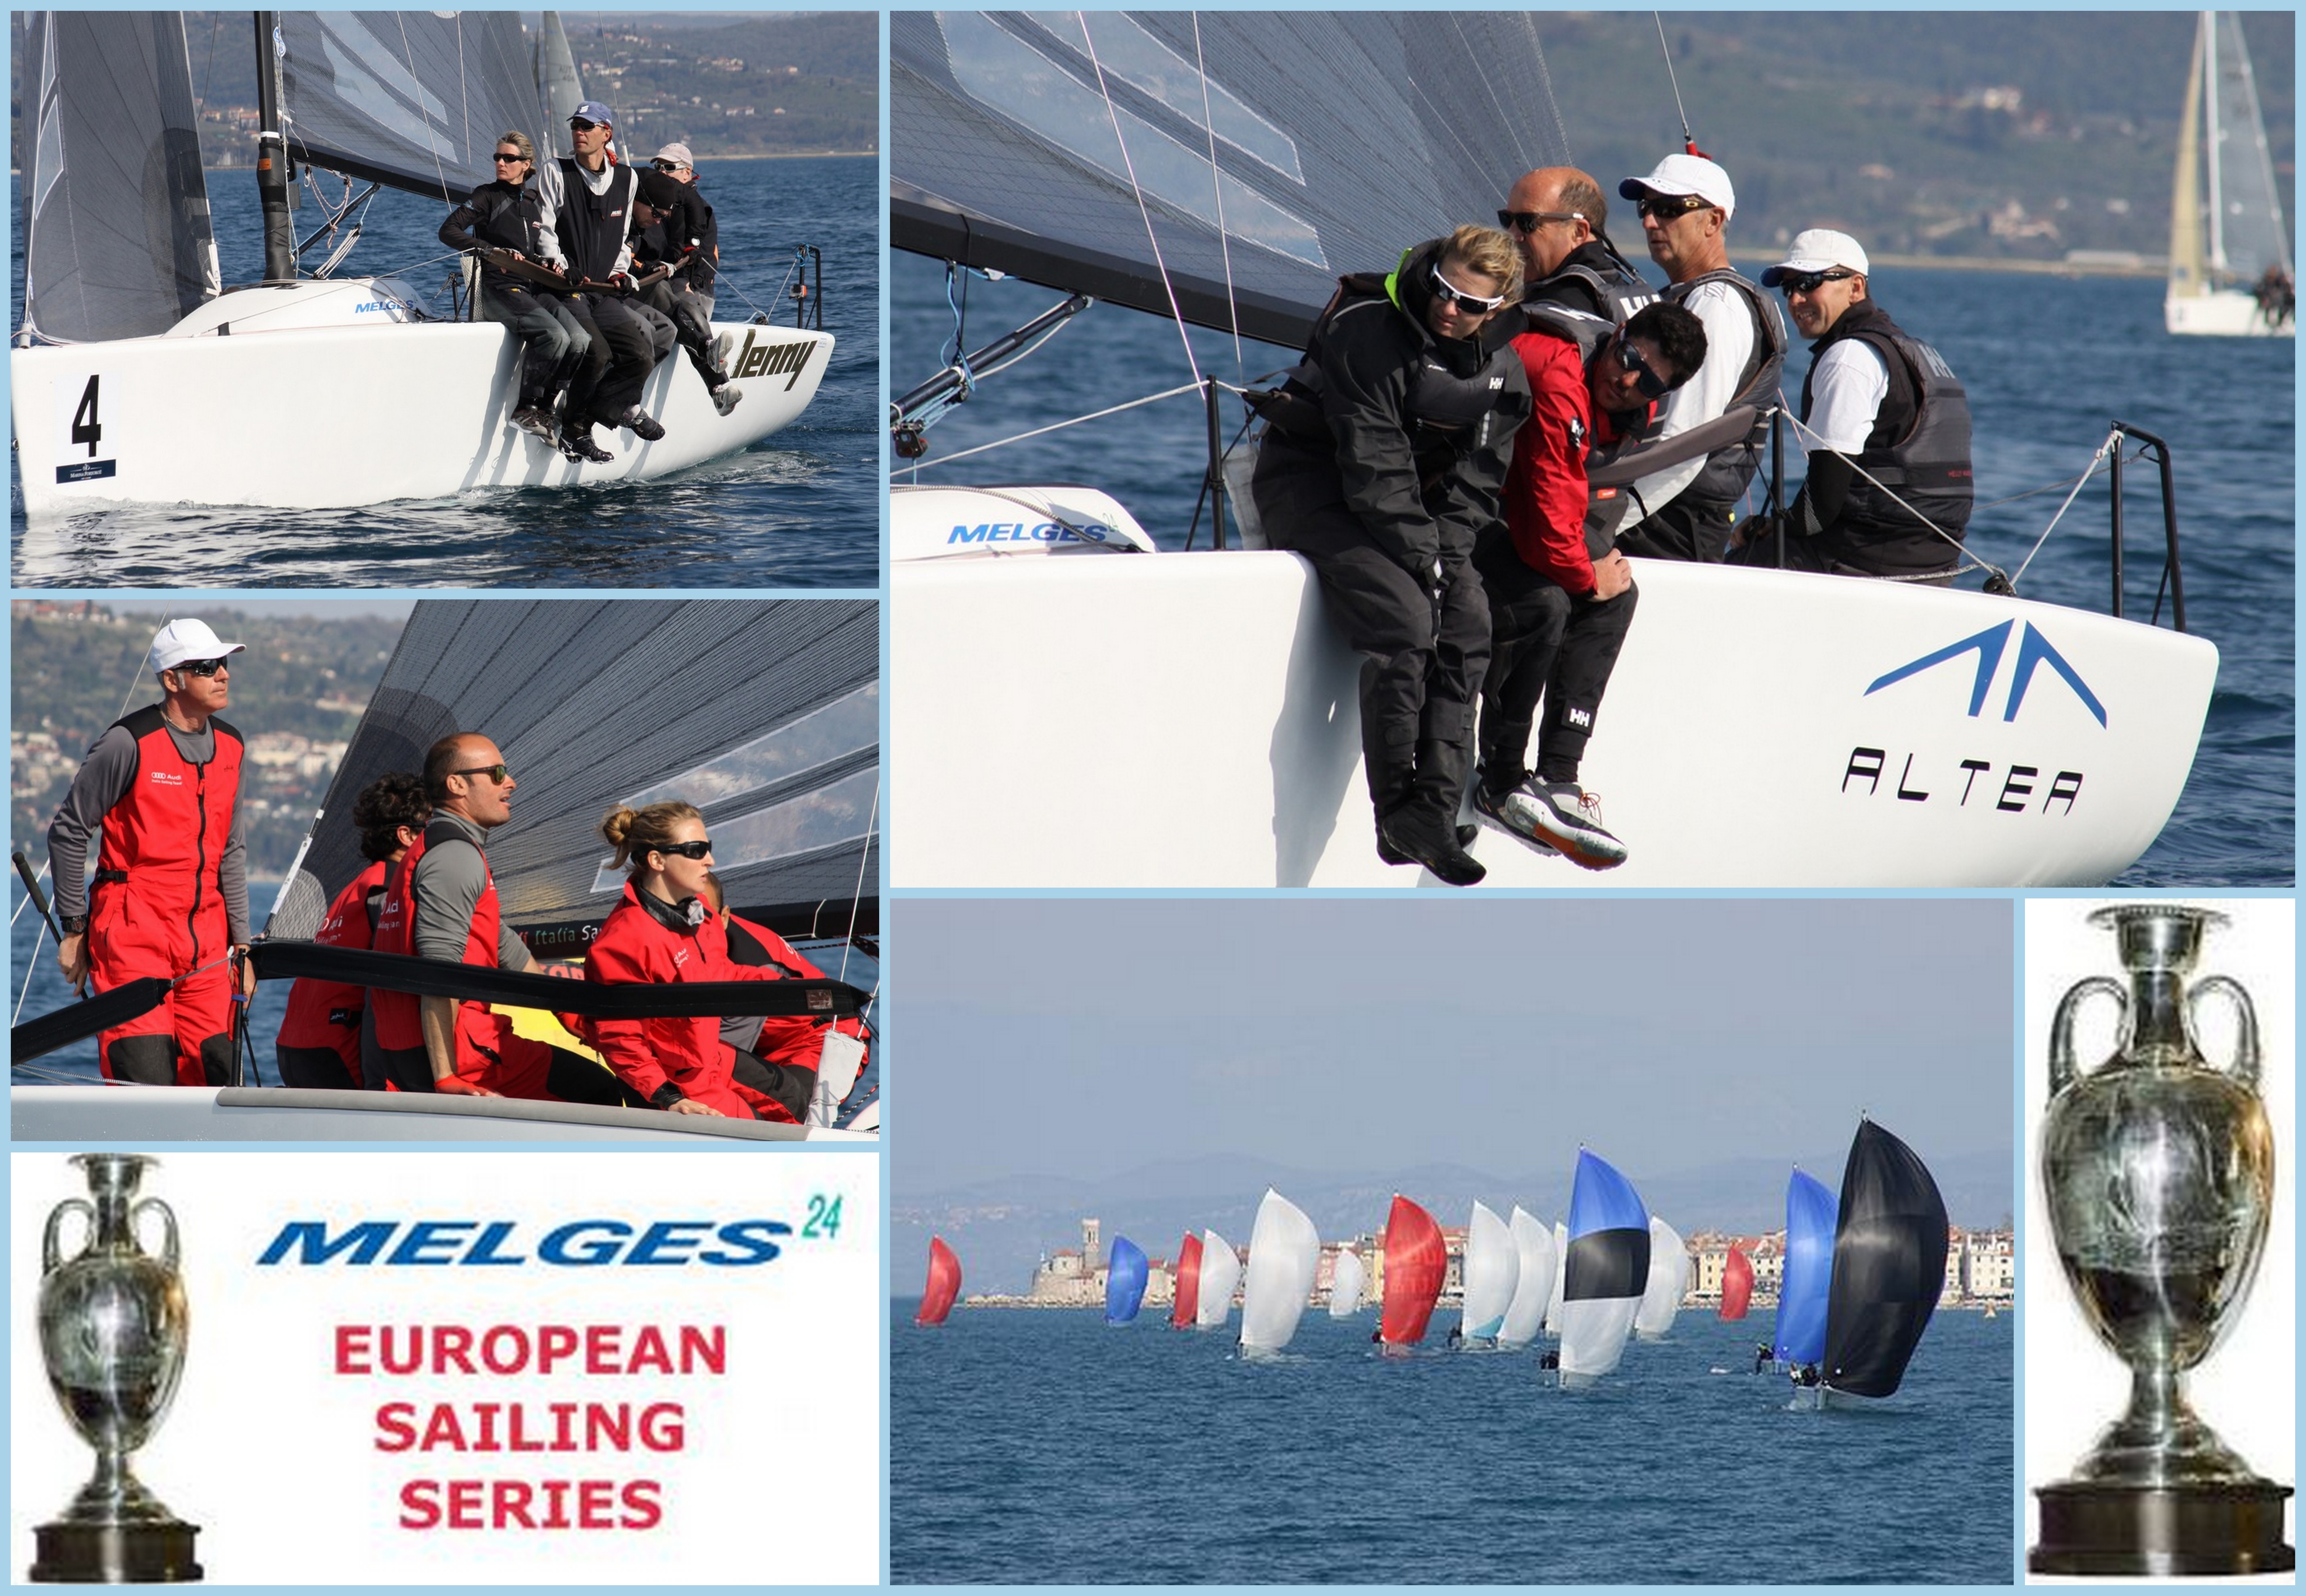 Winners of the Melges 24 European Sialing Series event in Portoroz